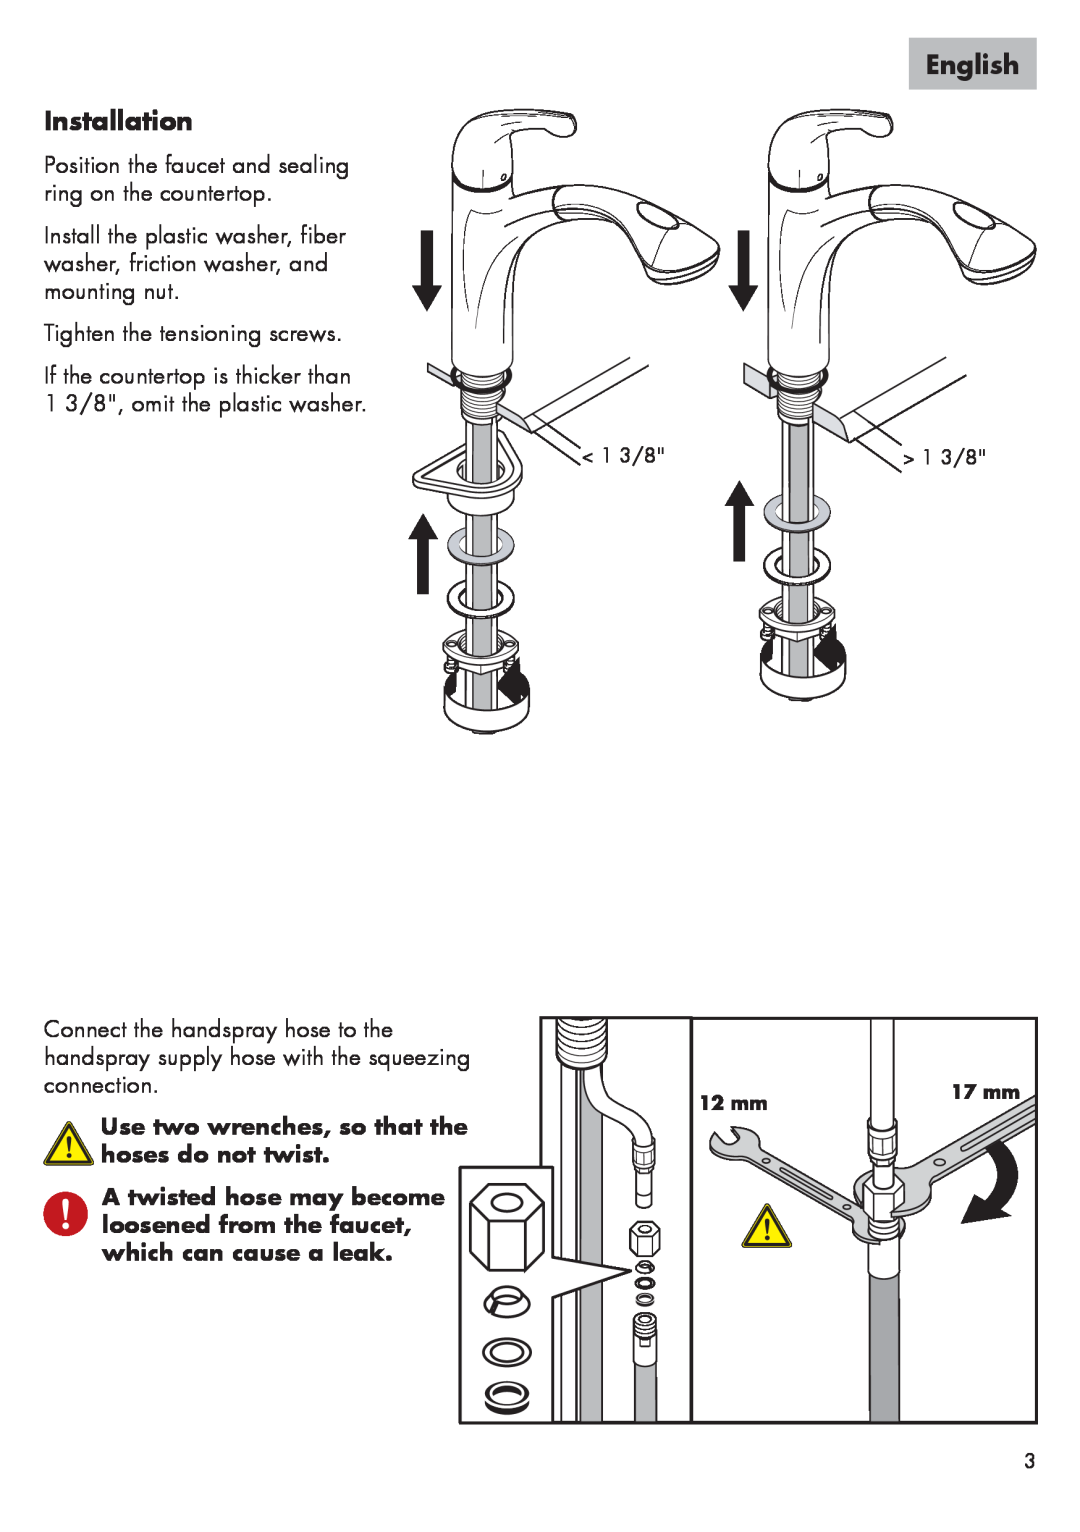 Axor 04076XX0 installation instructions Installation, Use two wrenches, so that the hoses do not twist, English 